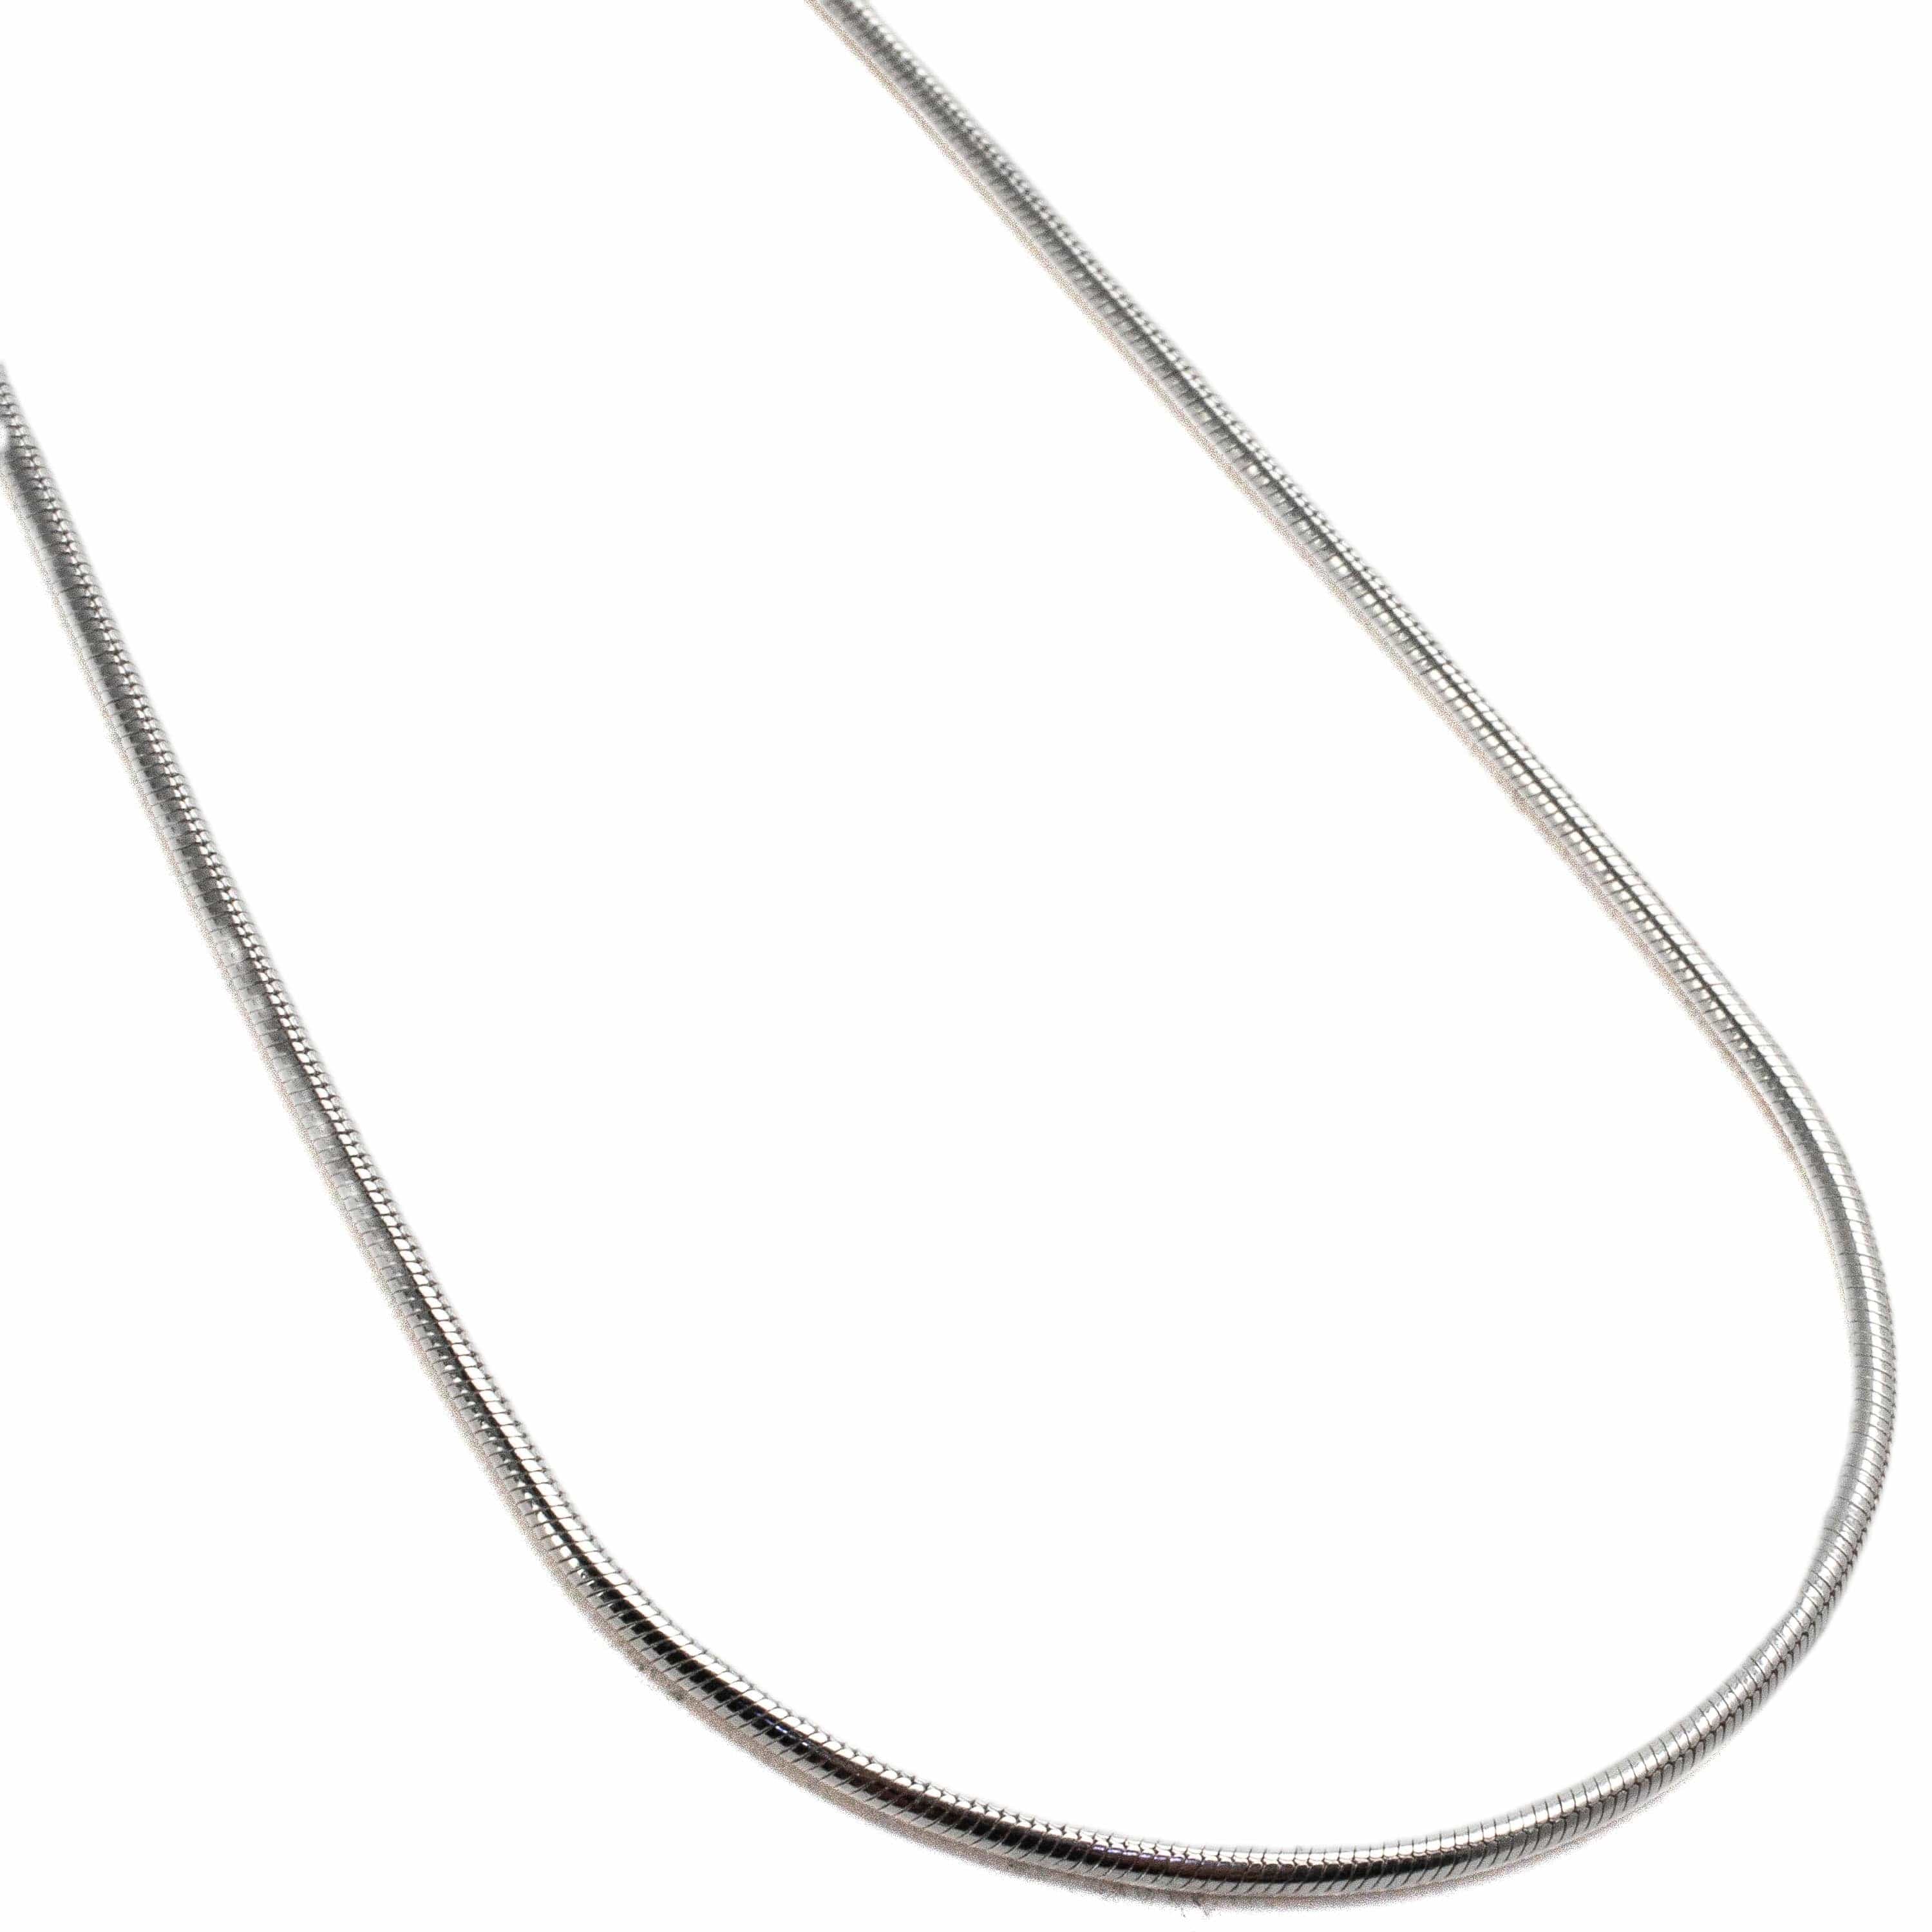 Kalifano Sterling Silver Chains 18" Italian Sterling Silver Snake Chain Necklace 1.5mm SCA-SNK040-18